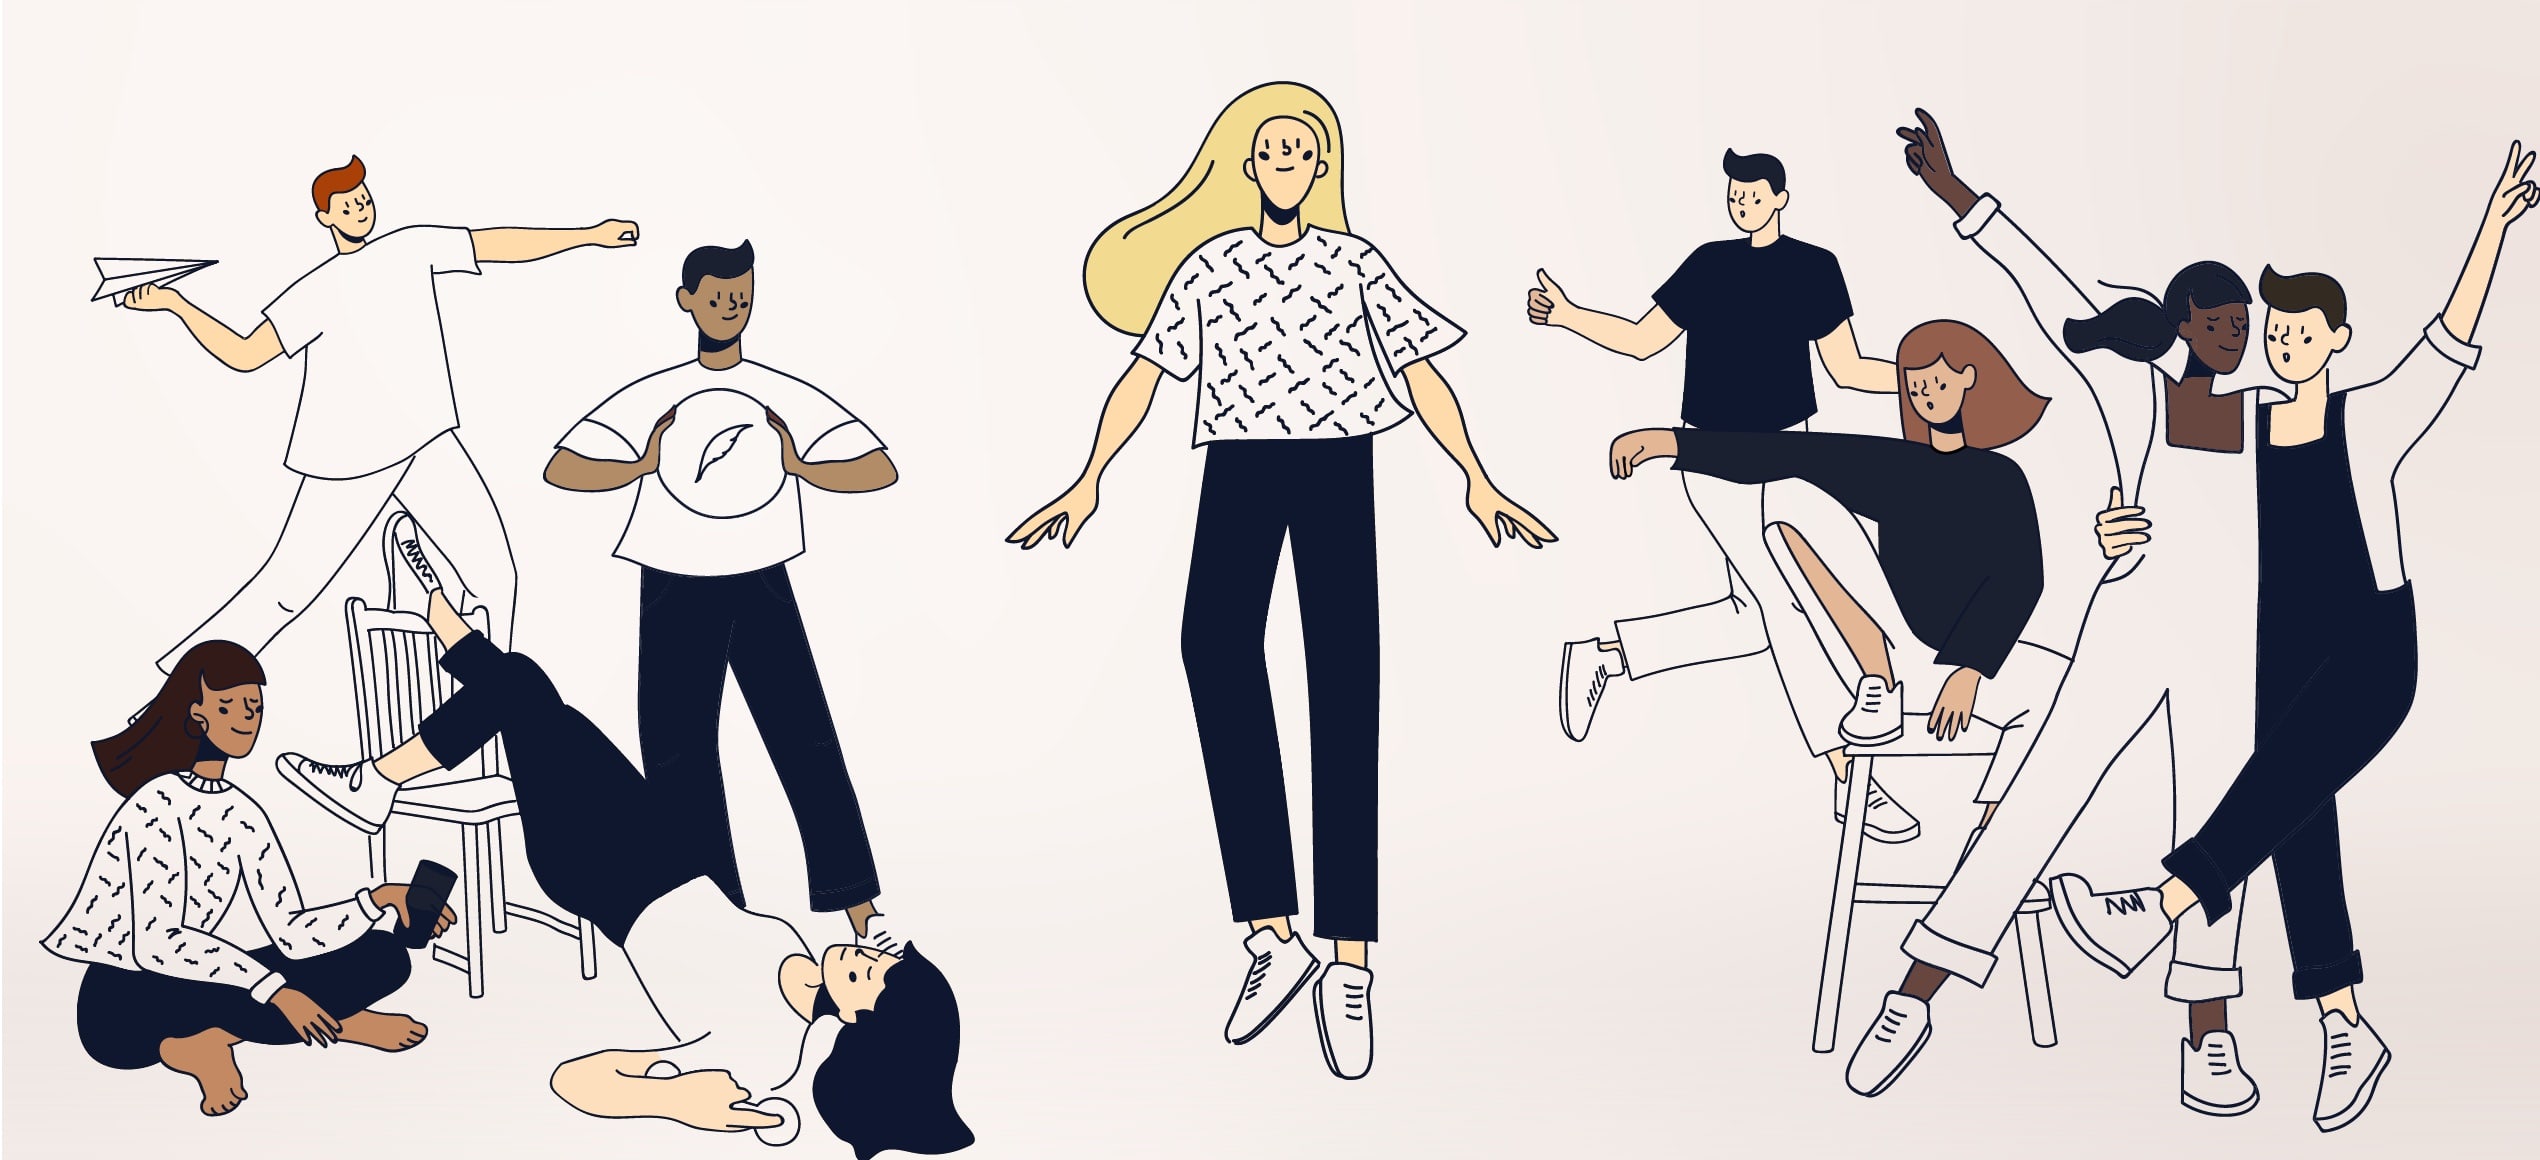 An illustration of a team. There are 9 people. The scene is quite chaotic. There are people dancing, playing games, and even one person levitating in the air!